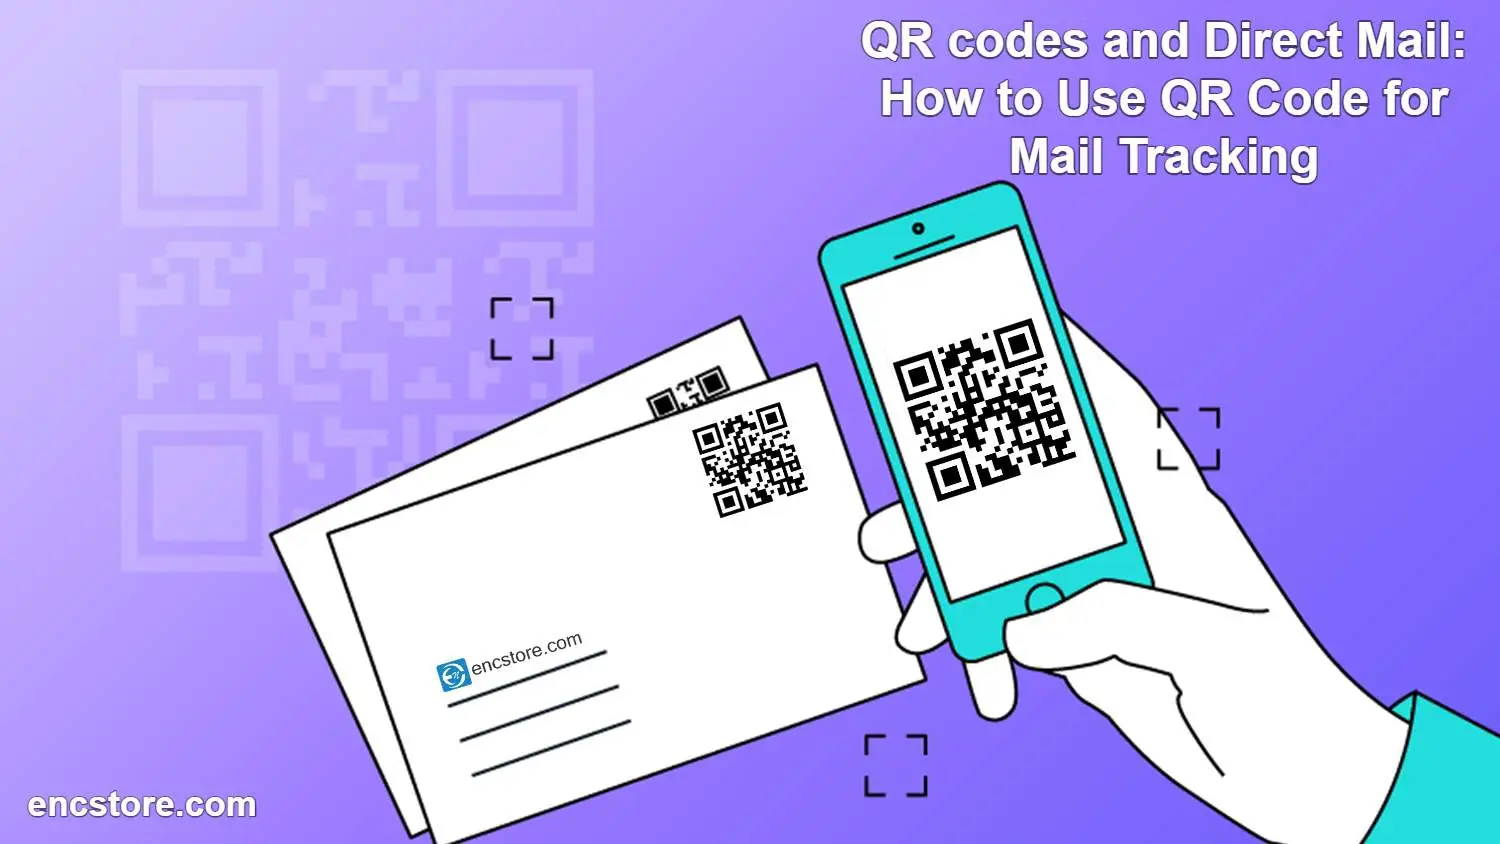 QR codes and Direct Mail: How to Use QR Code for Mail Tracking